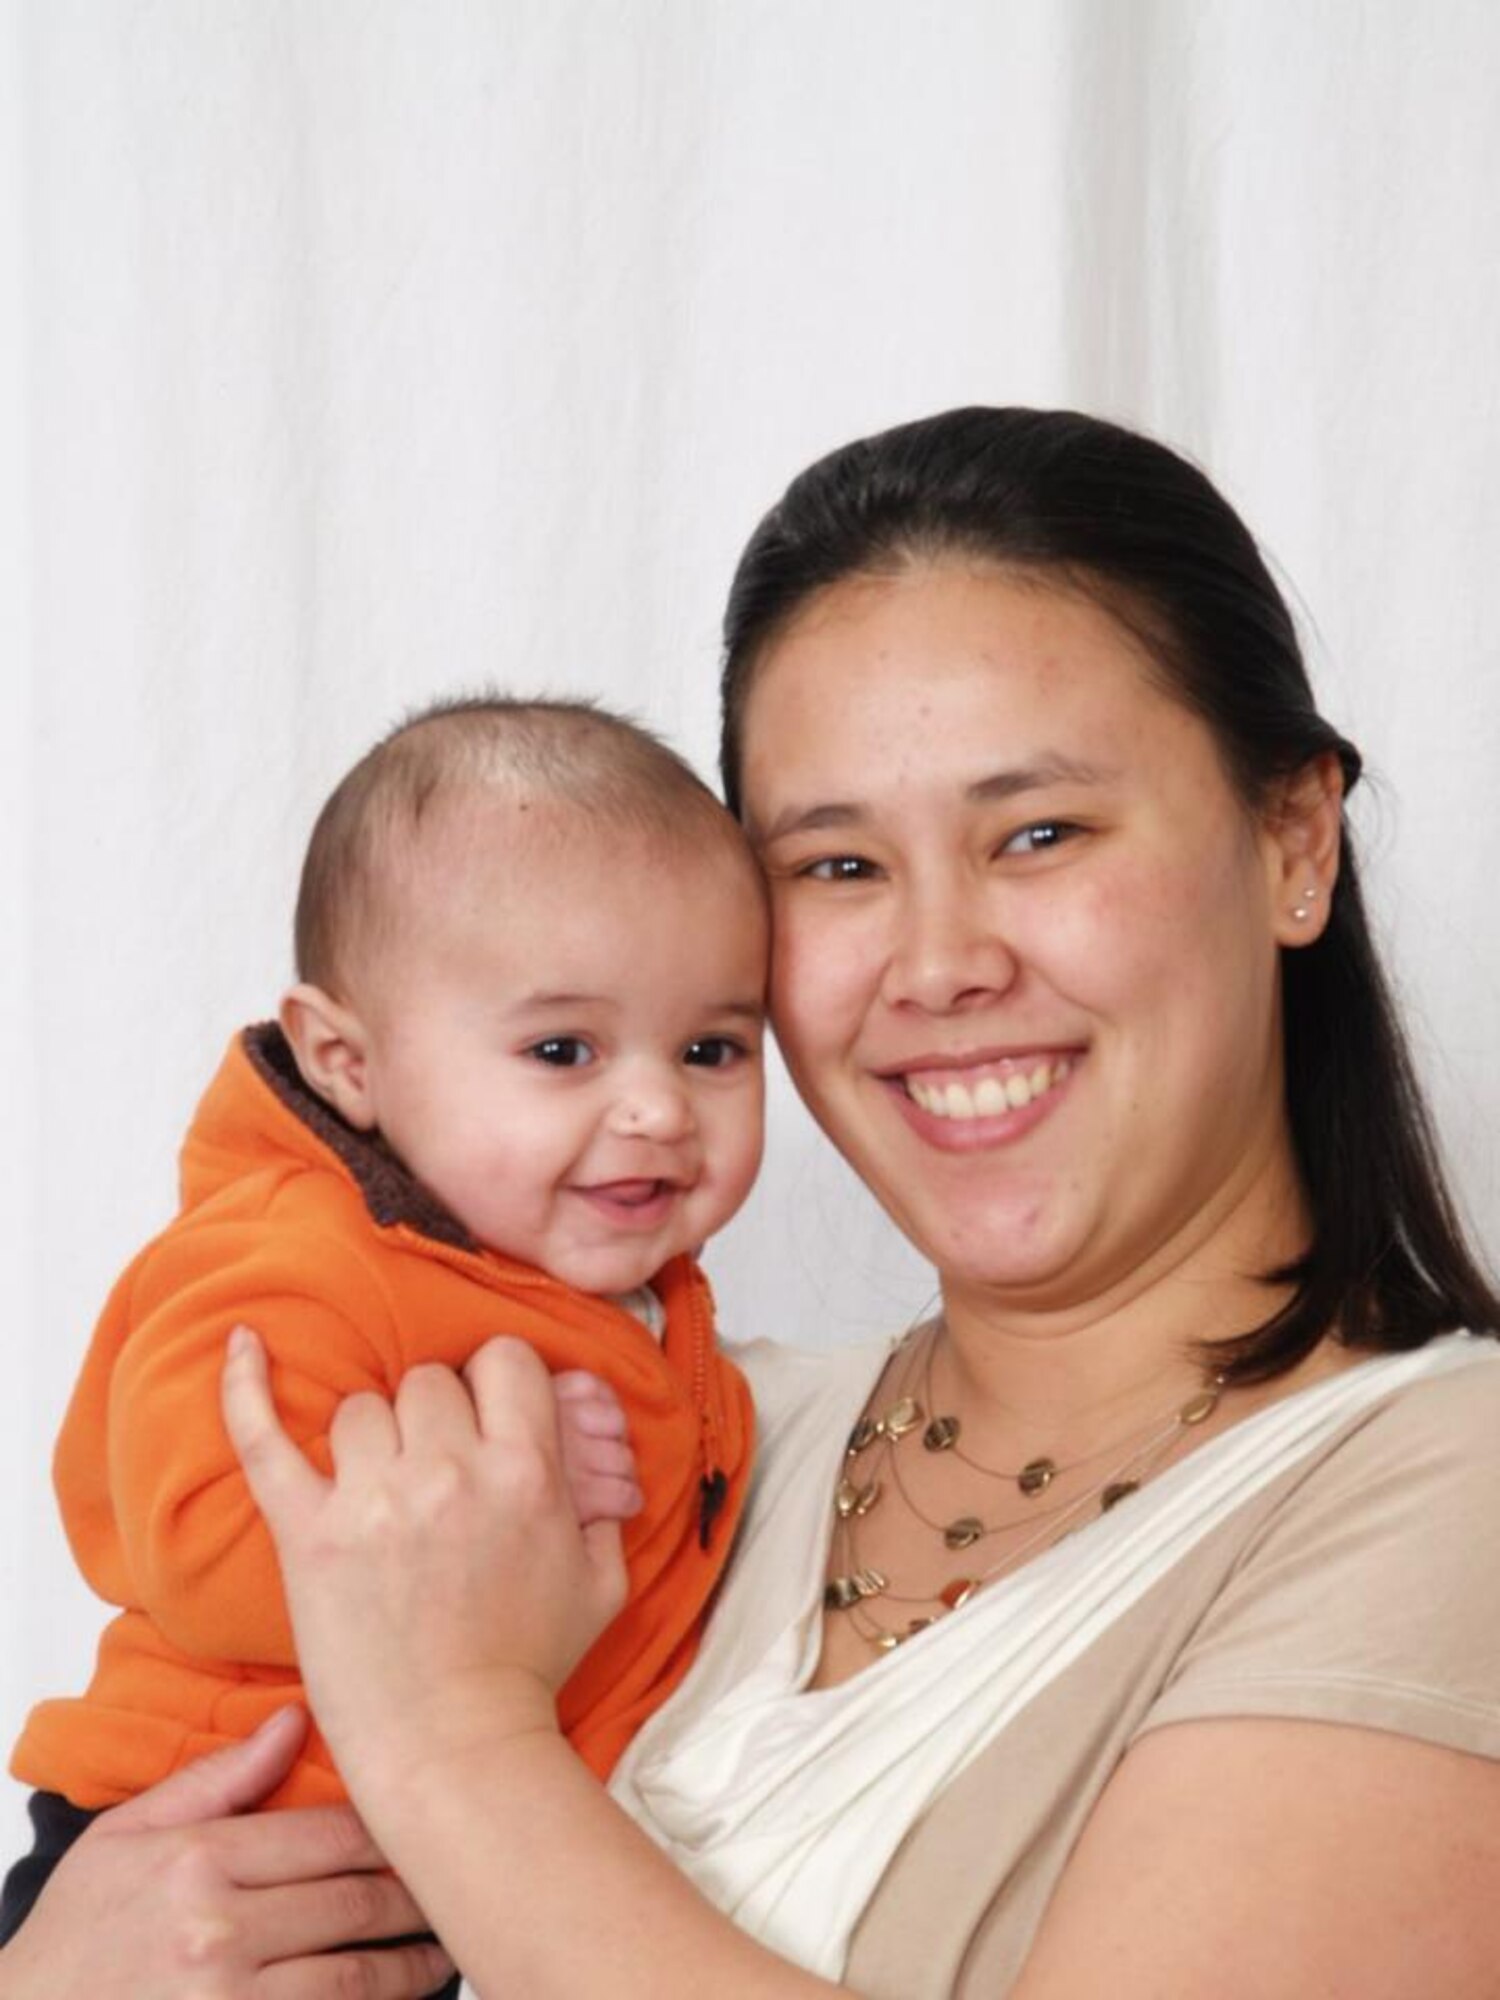 Capt. Victoria A. "Tori" Pinckney, 27, from Colorado Springs, Colorado, shown pictured here with her now 7-month-old son Gabriel, died on 3 May 2013 when her aircraft crashed shortly after takeoff near Bichkek, Kyrgyzstan. (Courtesy photo)